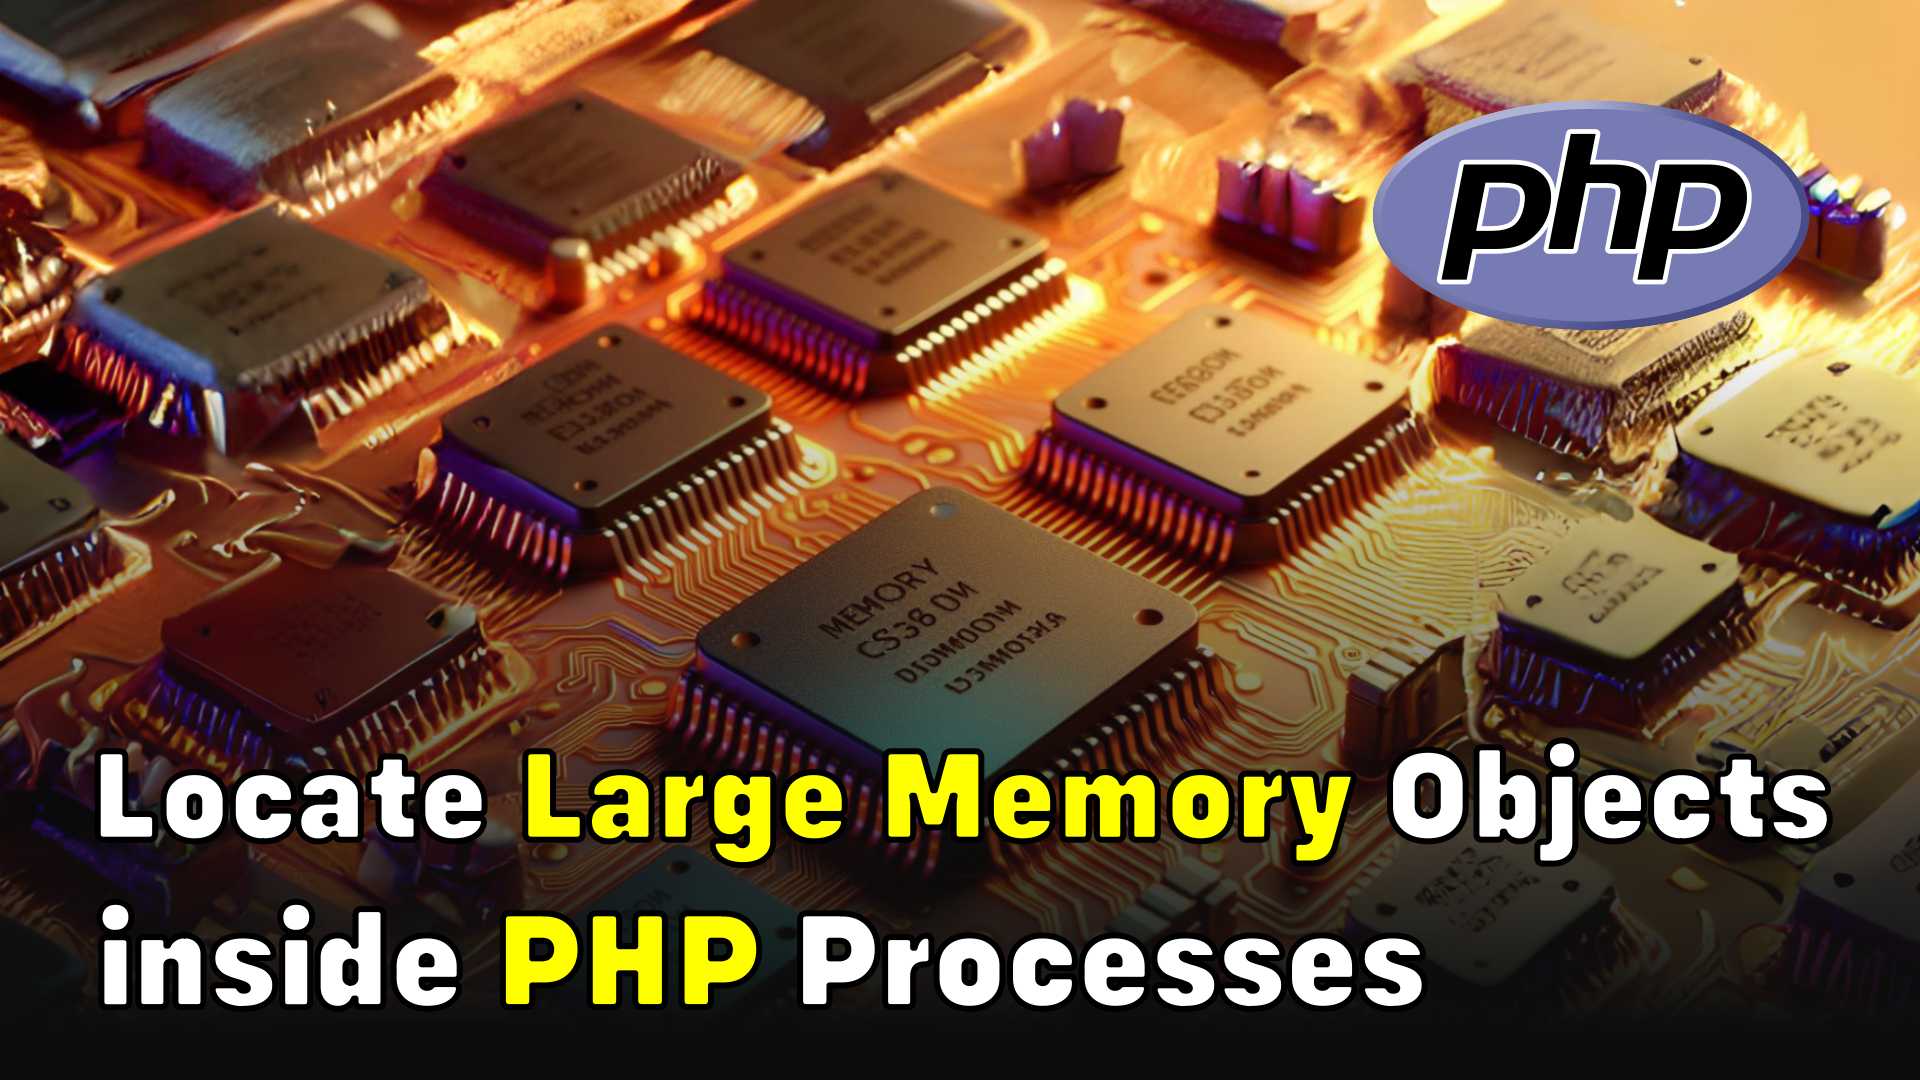 Locate Large Memory Objects inside PHP Processes (using OpenResty XRay)